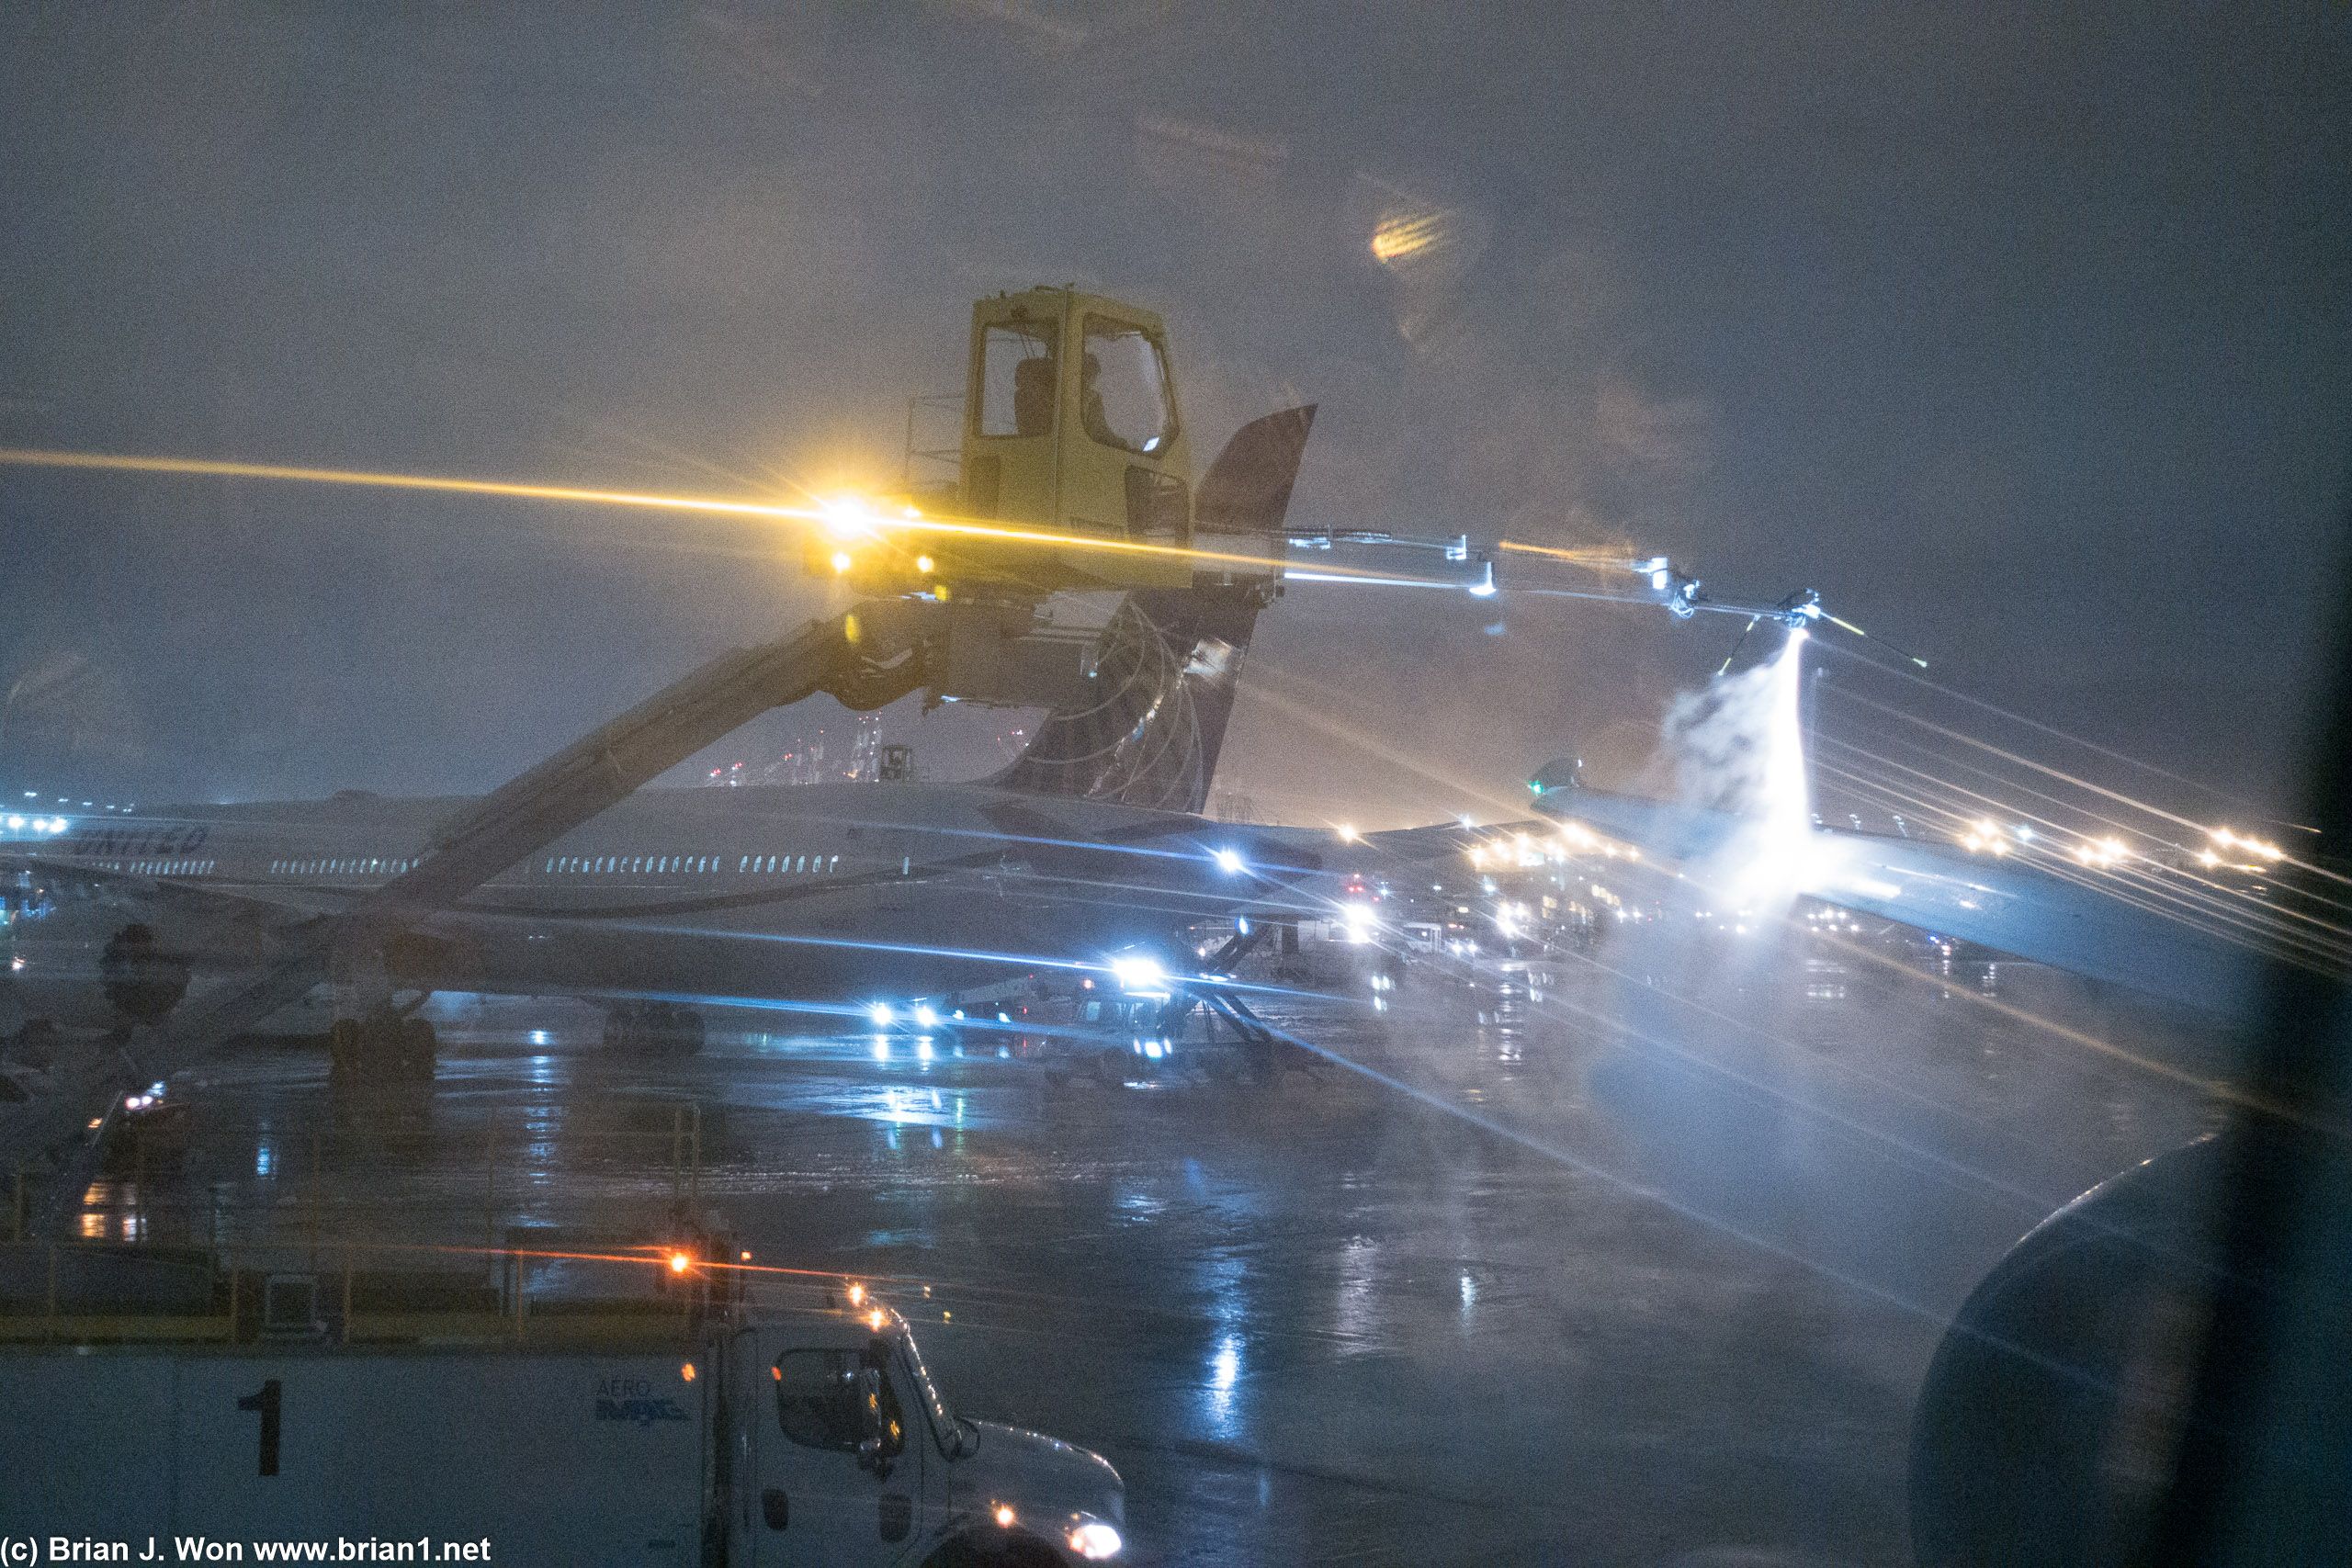 Another Boeing 787 Dreamliner in the background, also being de-iced.